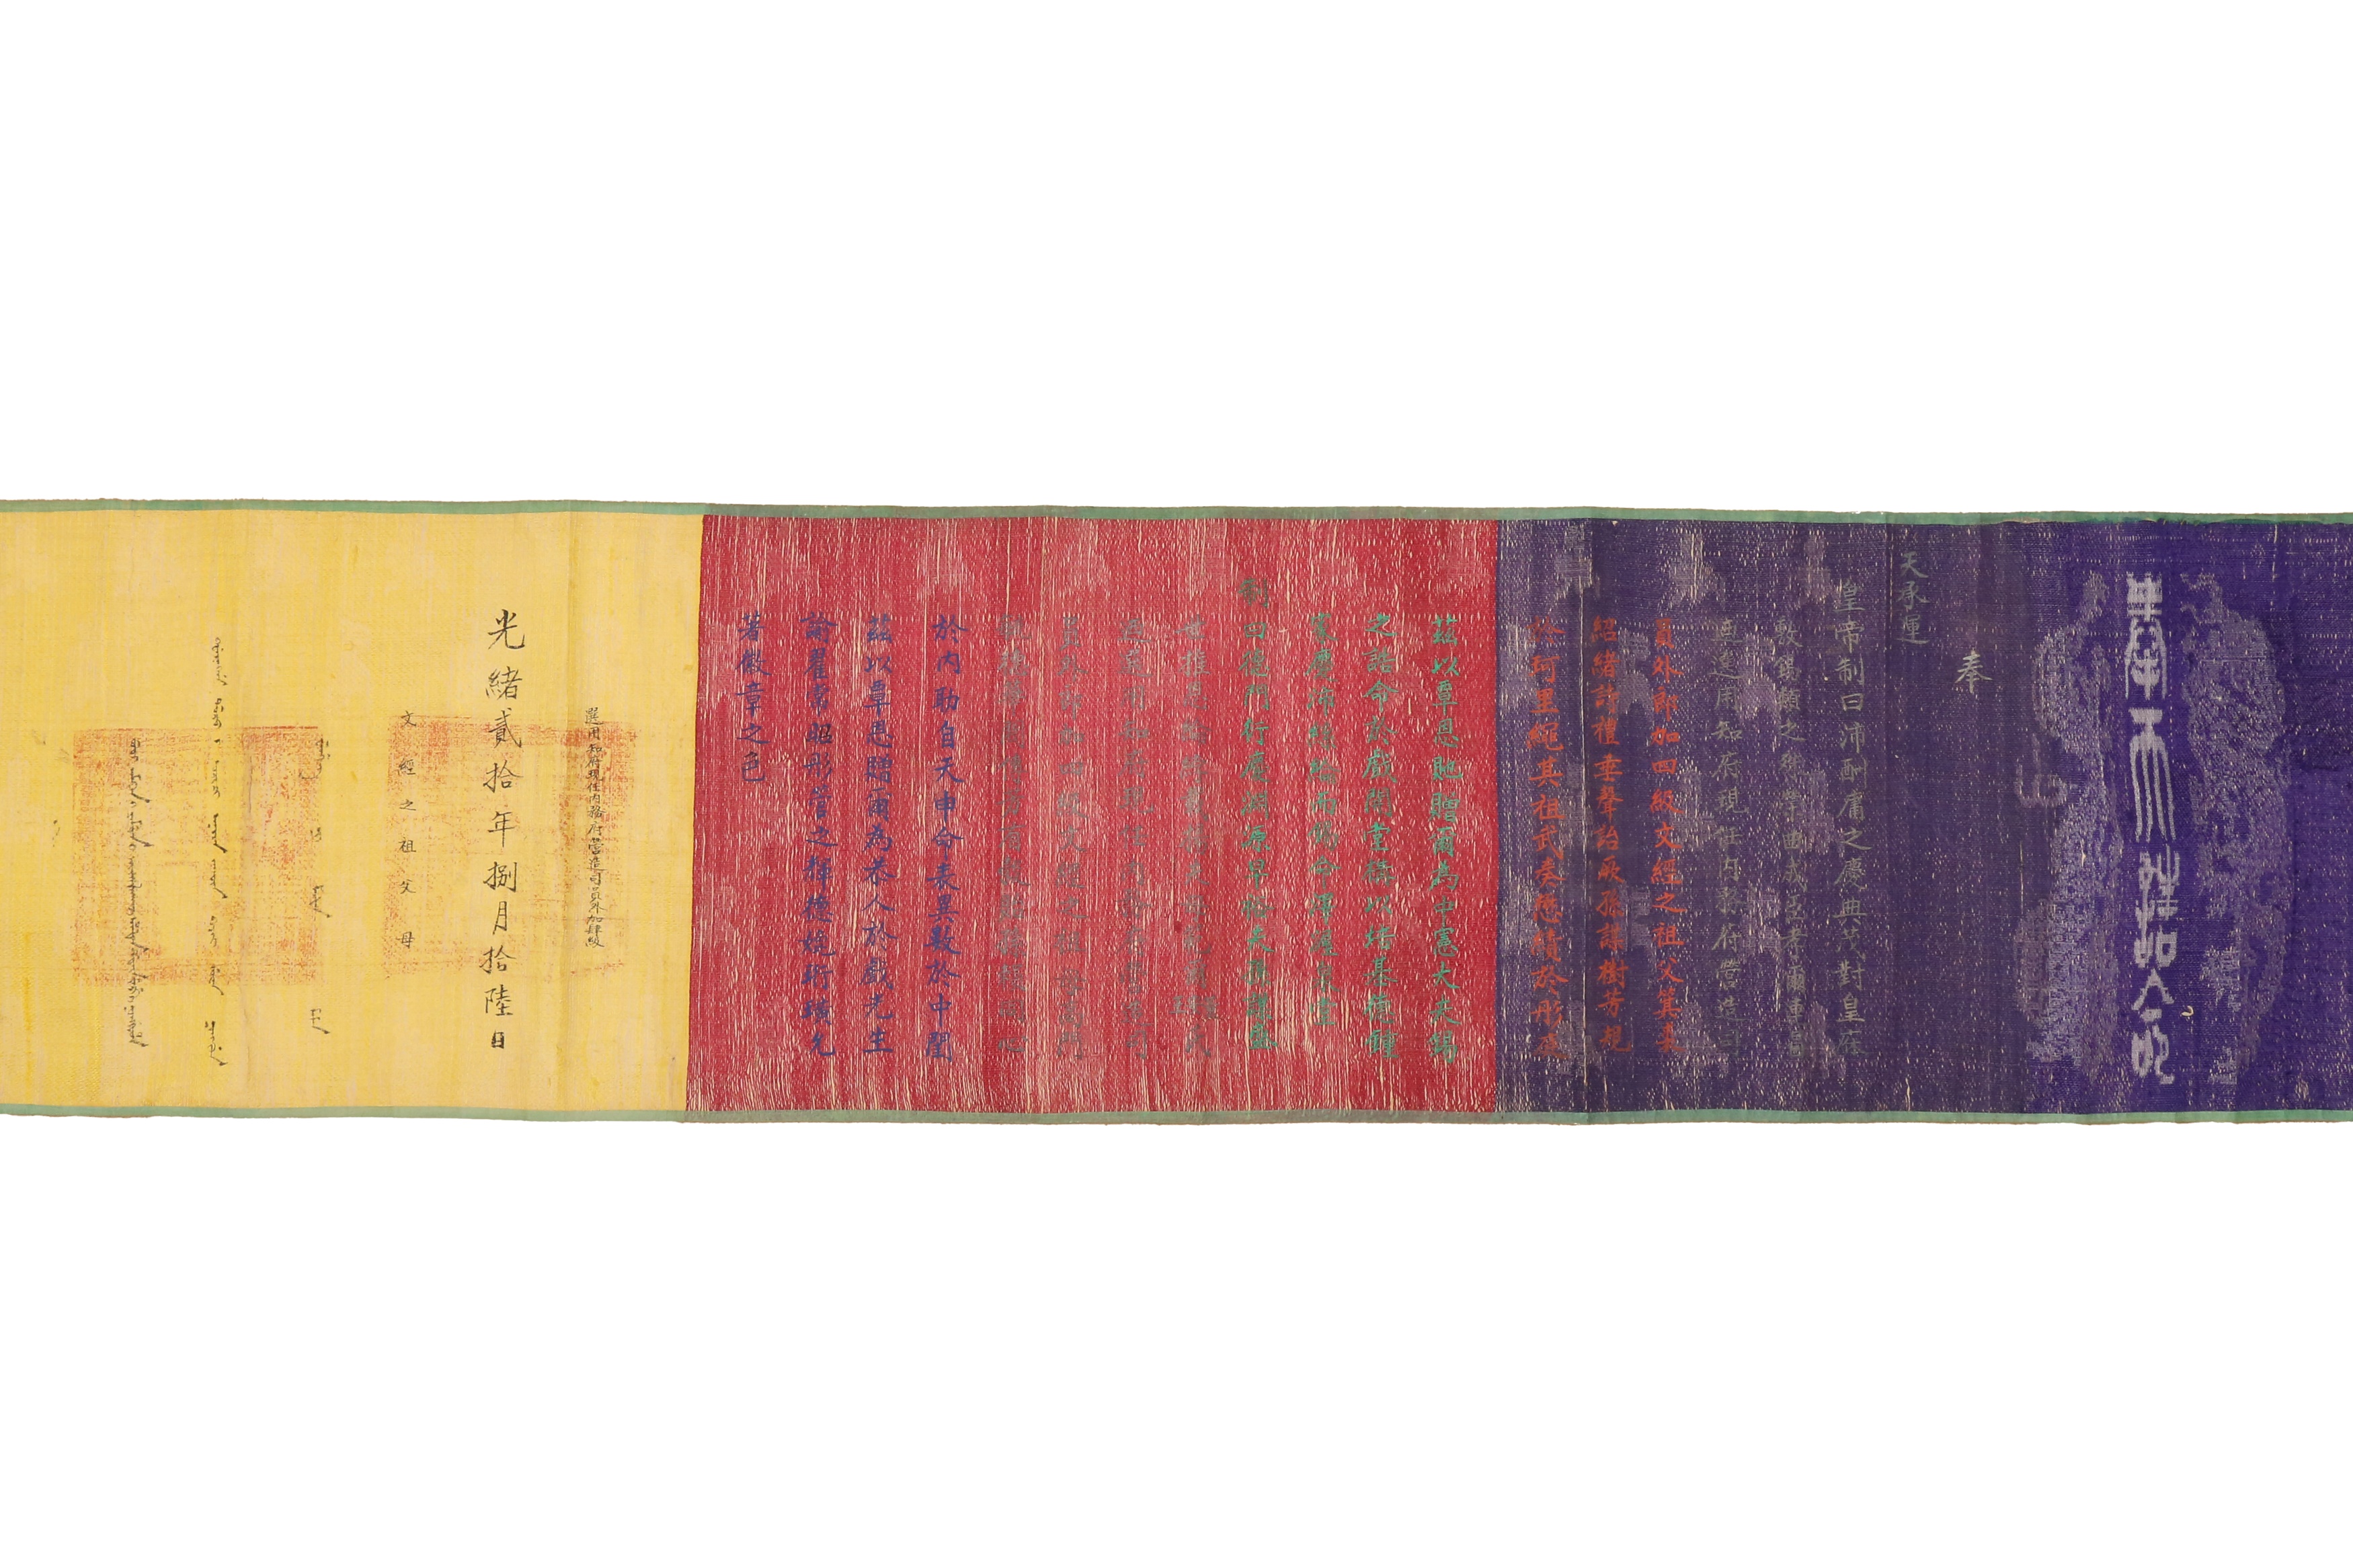 A CHINESE IMPERIAL EDICT HANDSCROLL 清光緒 1894年 世襲誥命文書 - Image 5 of 30